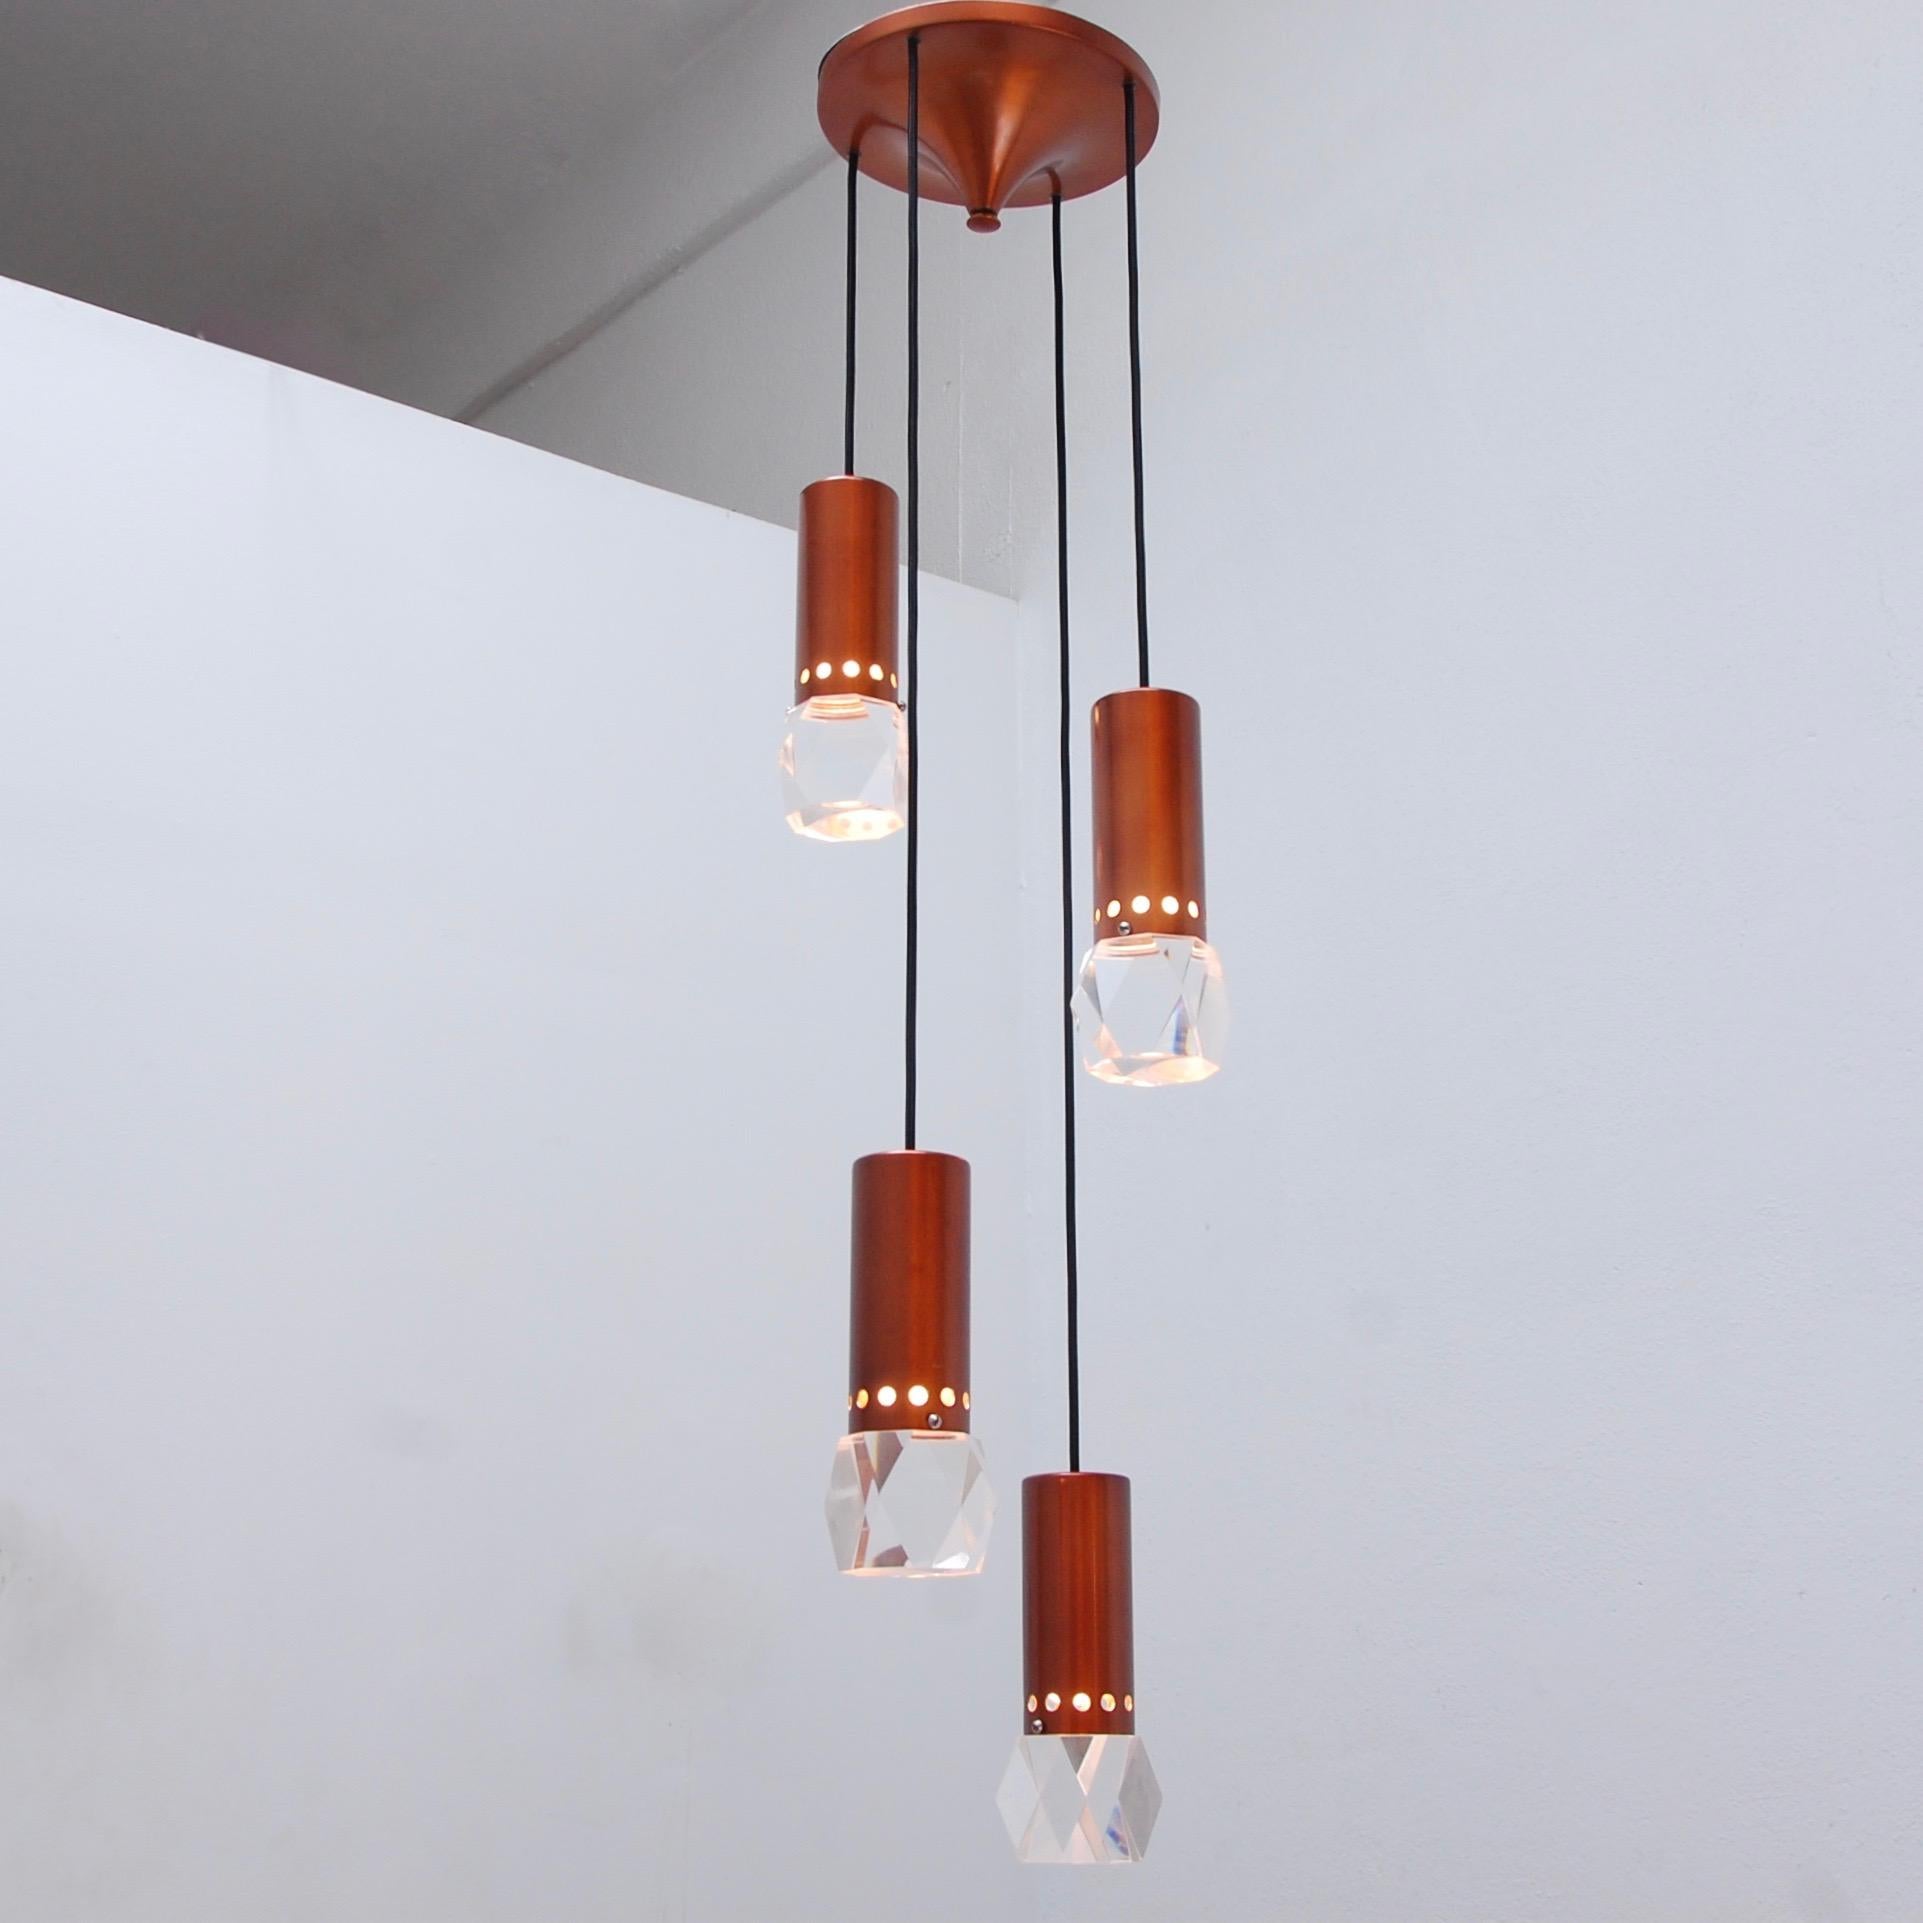 Three captivating pendant chandeliers with four pendant lights hanging from a single canopy in copper colored painted aluminum and Lucite shades, Italy, 1950s. Wired for use in the US. OAD can be adjusted upon request. Four E26 medium based light